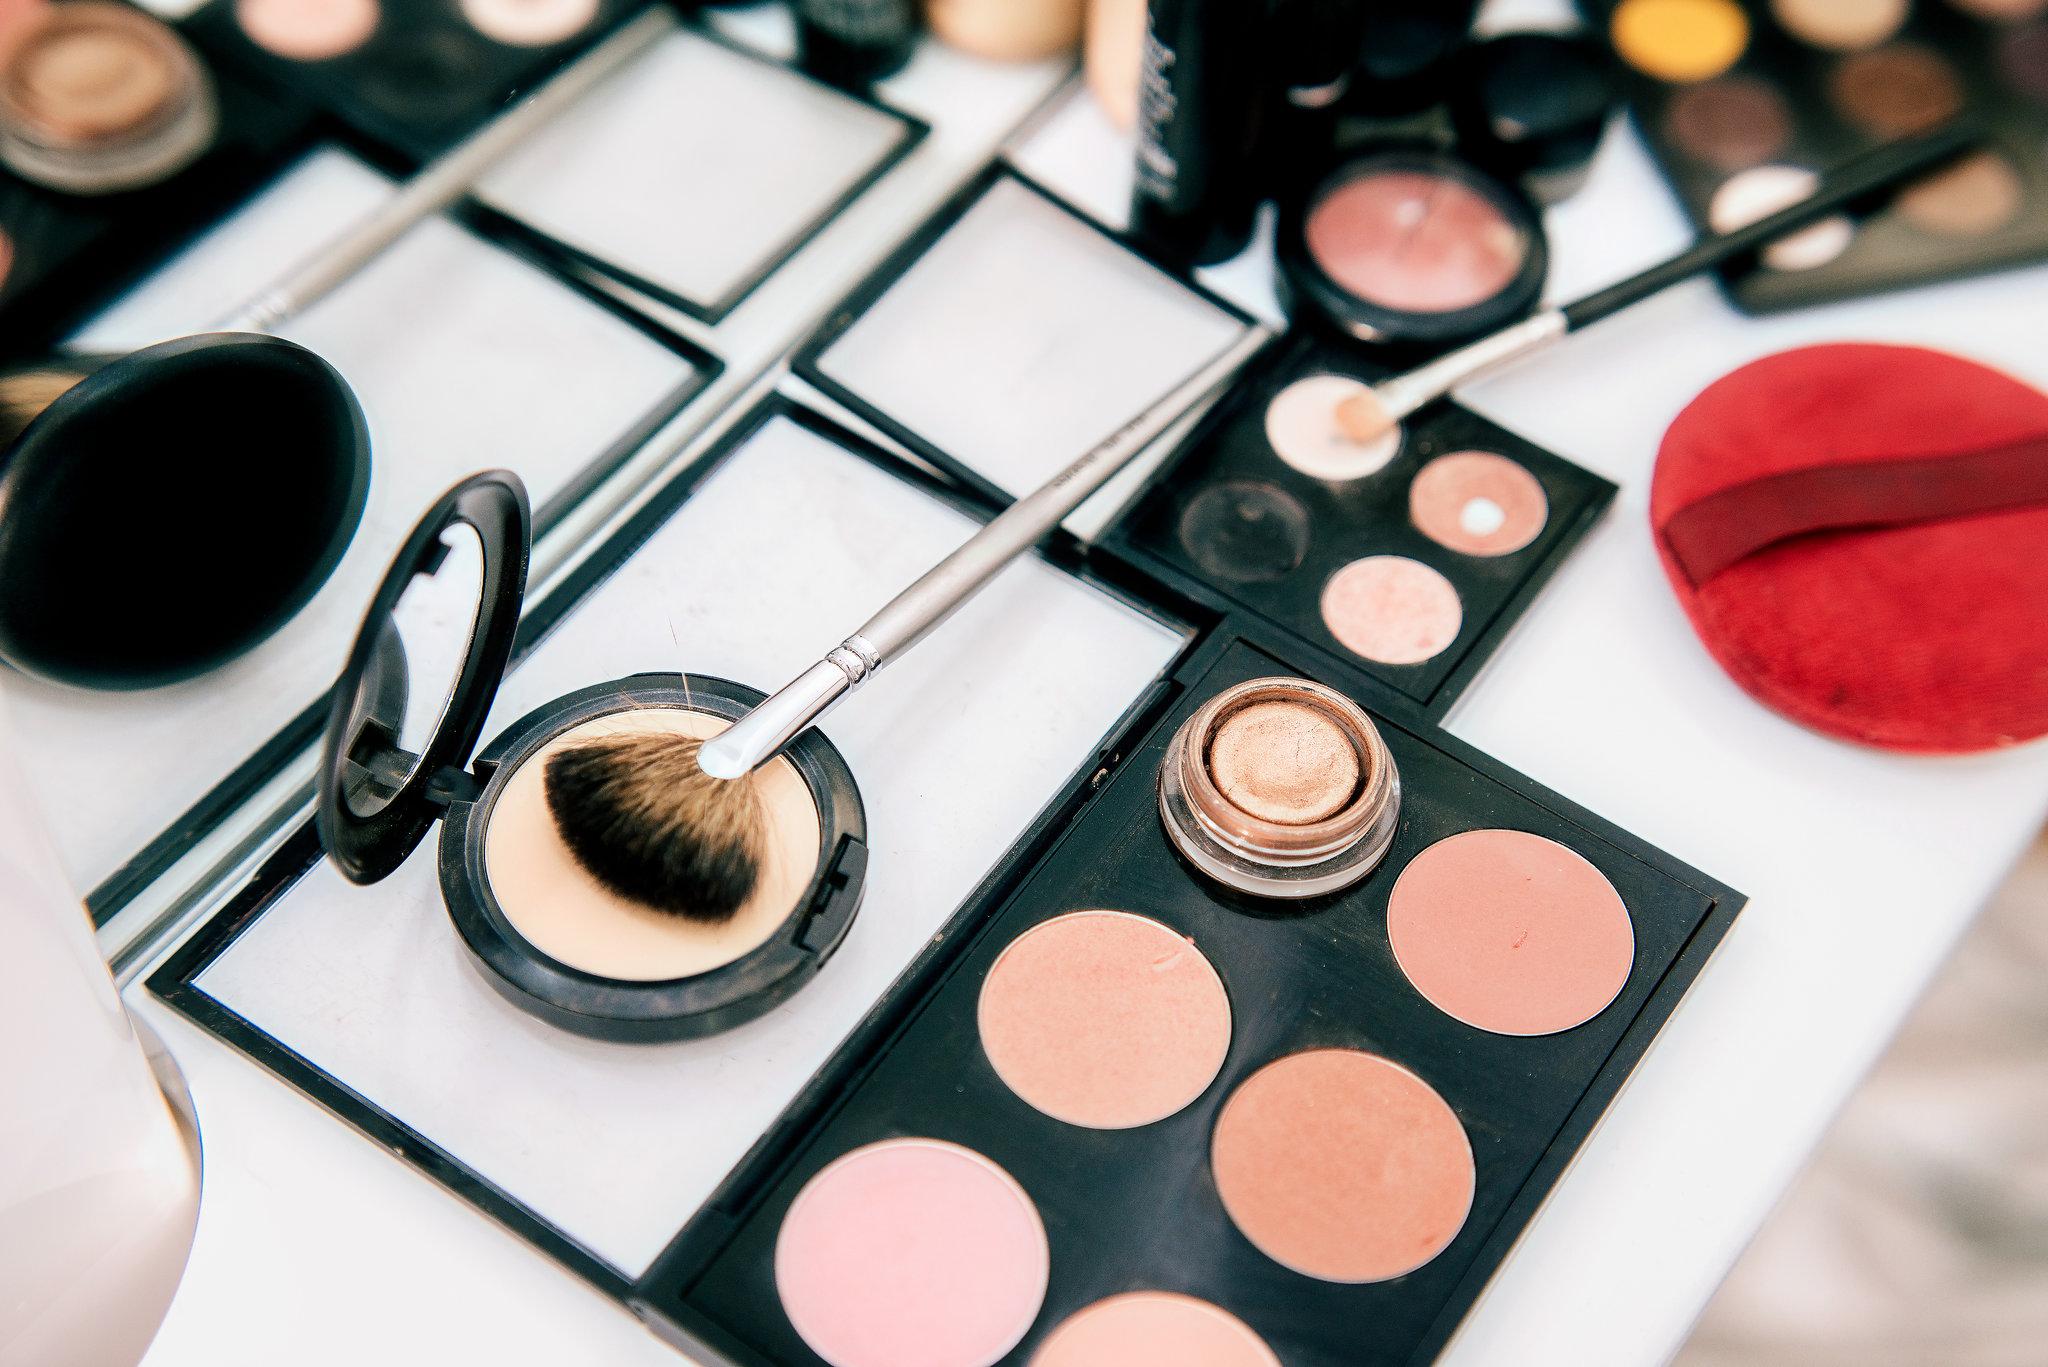 in-your-makeup-kit-these-5-things-can-be-a-threat-to-your-health